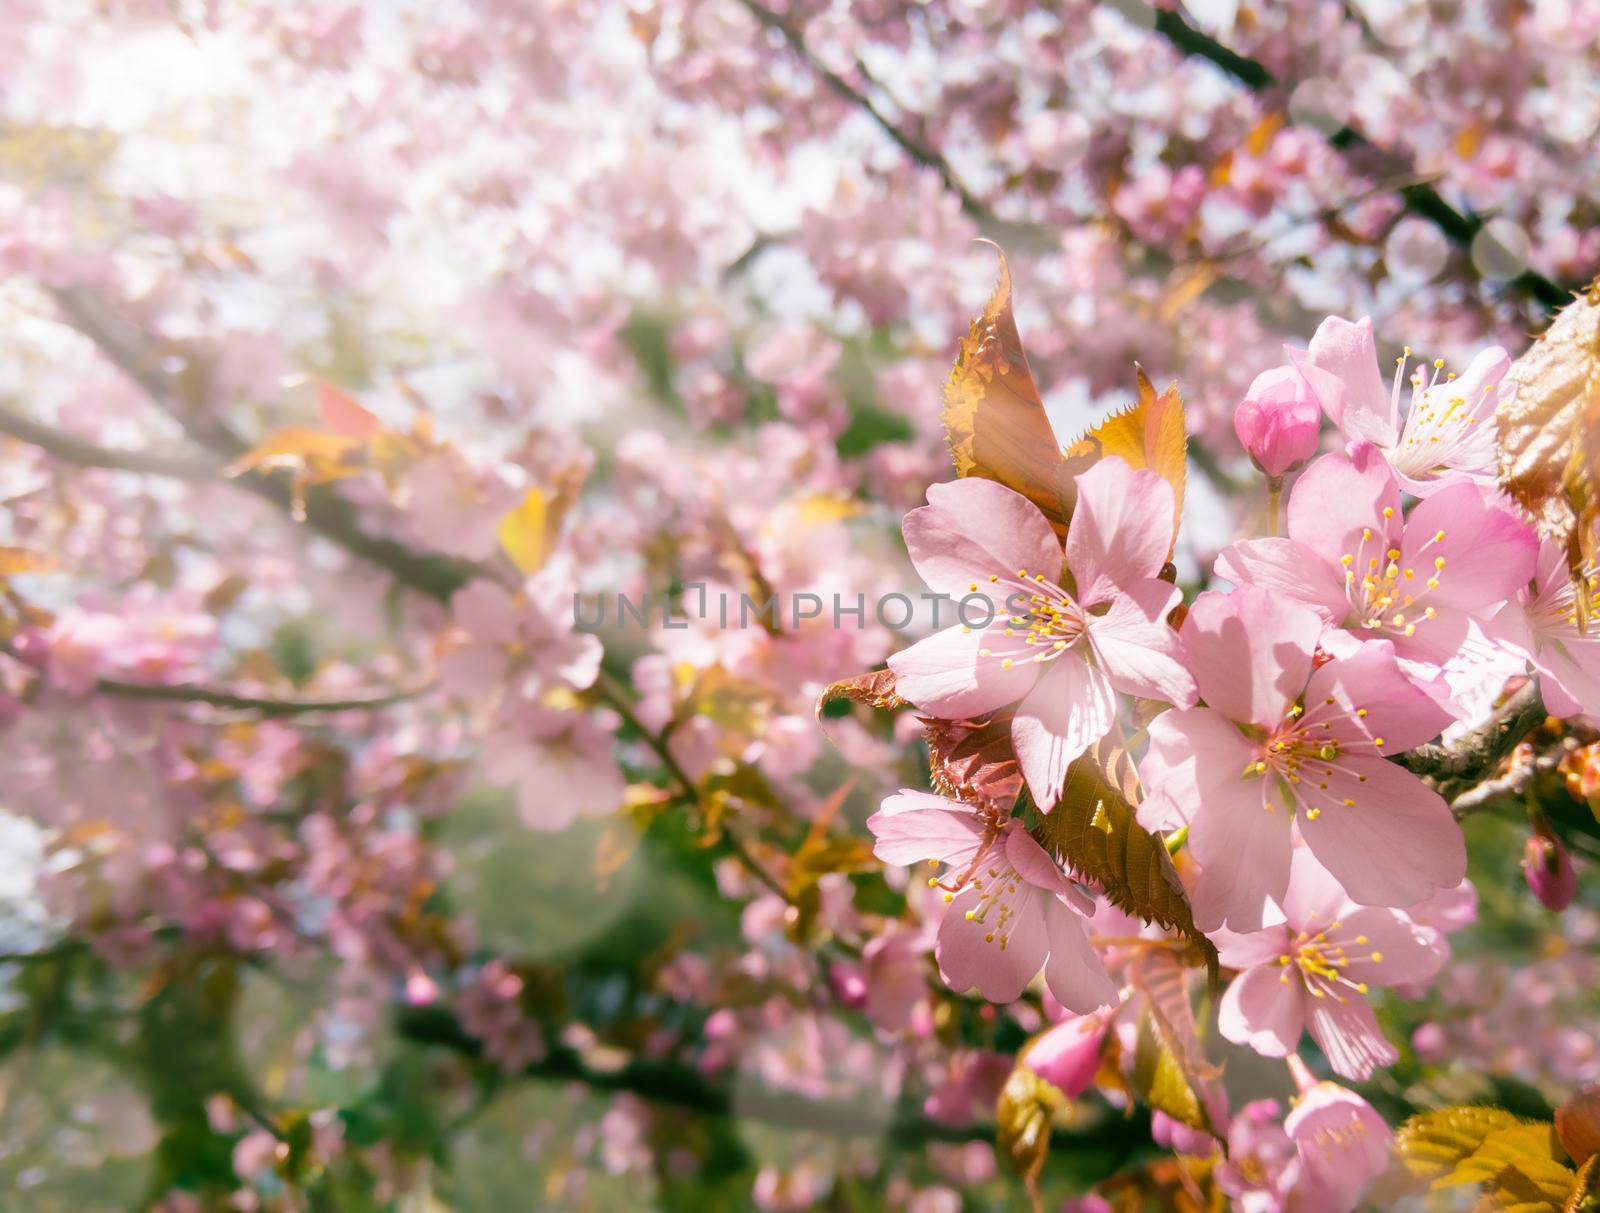 Pink cherry tree blossom with sun rays. Stock photo by anna_artist